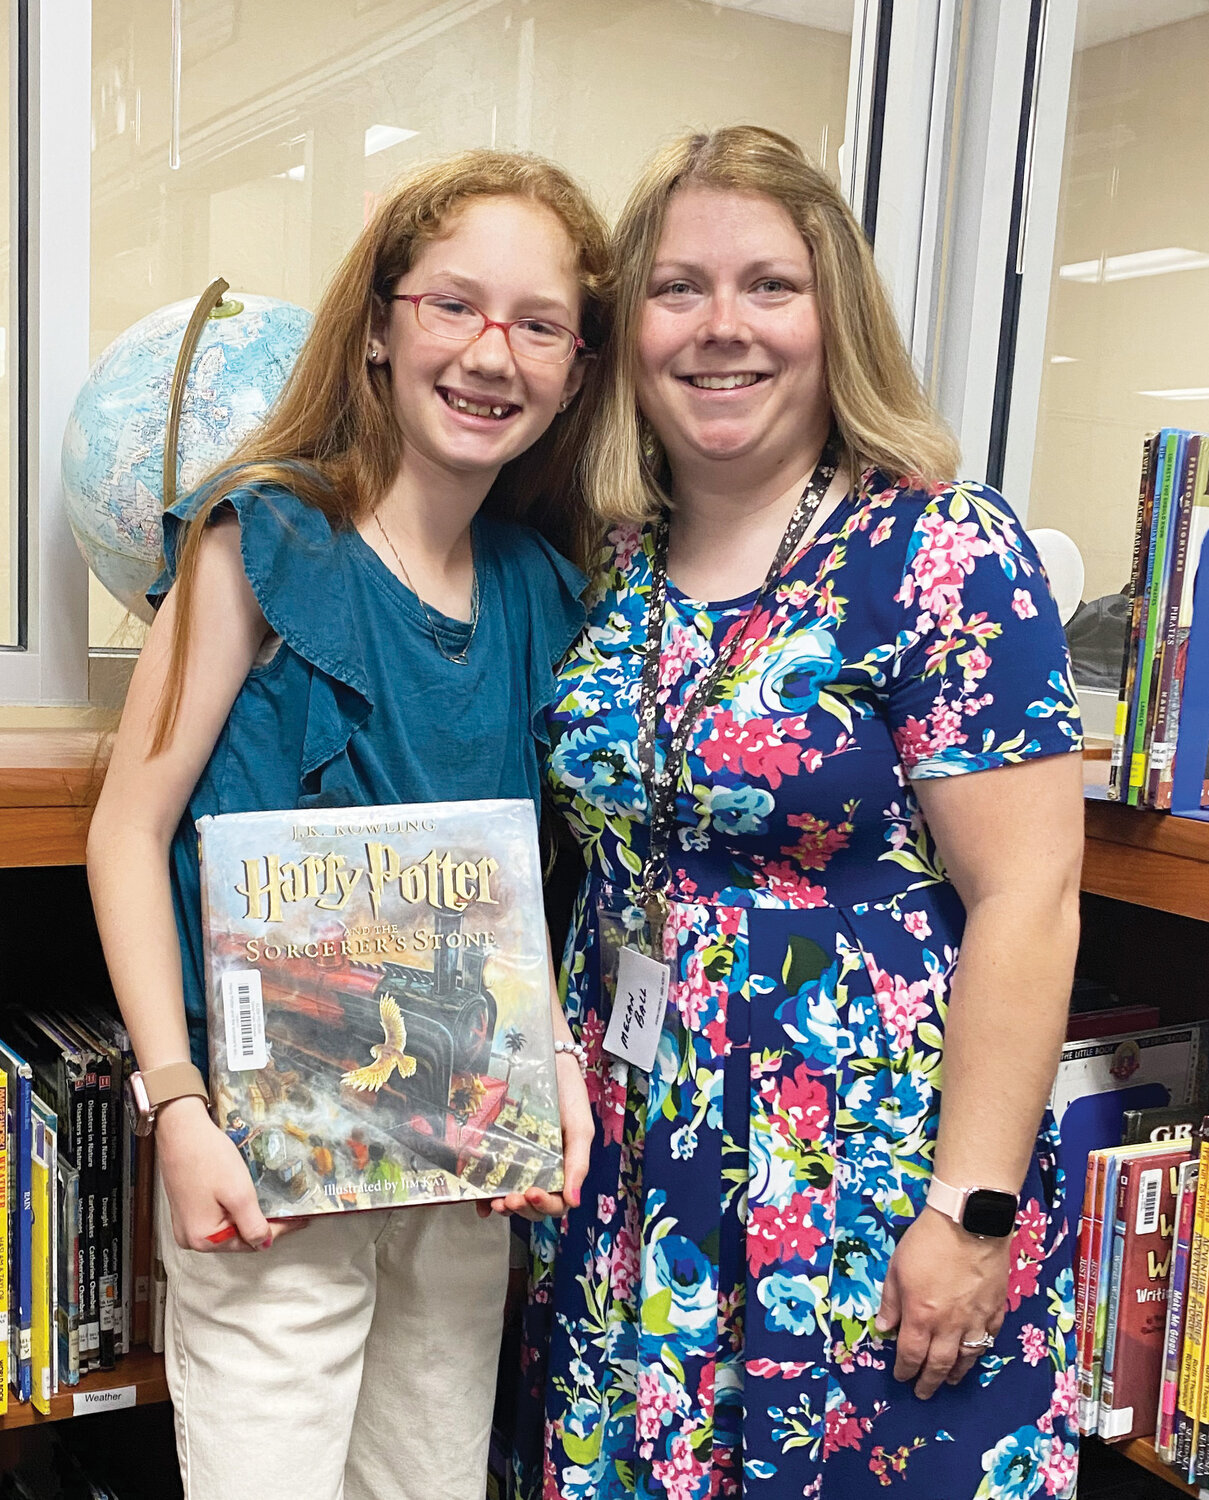 Dibble fifth grader Carlie Hayden broke the school record for amassing 1,148.1 accelerated reading points this year. She was congratulated by Elementary School Librarian Megan Ball.